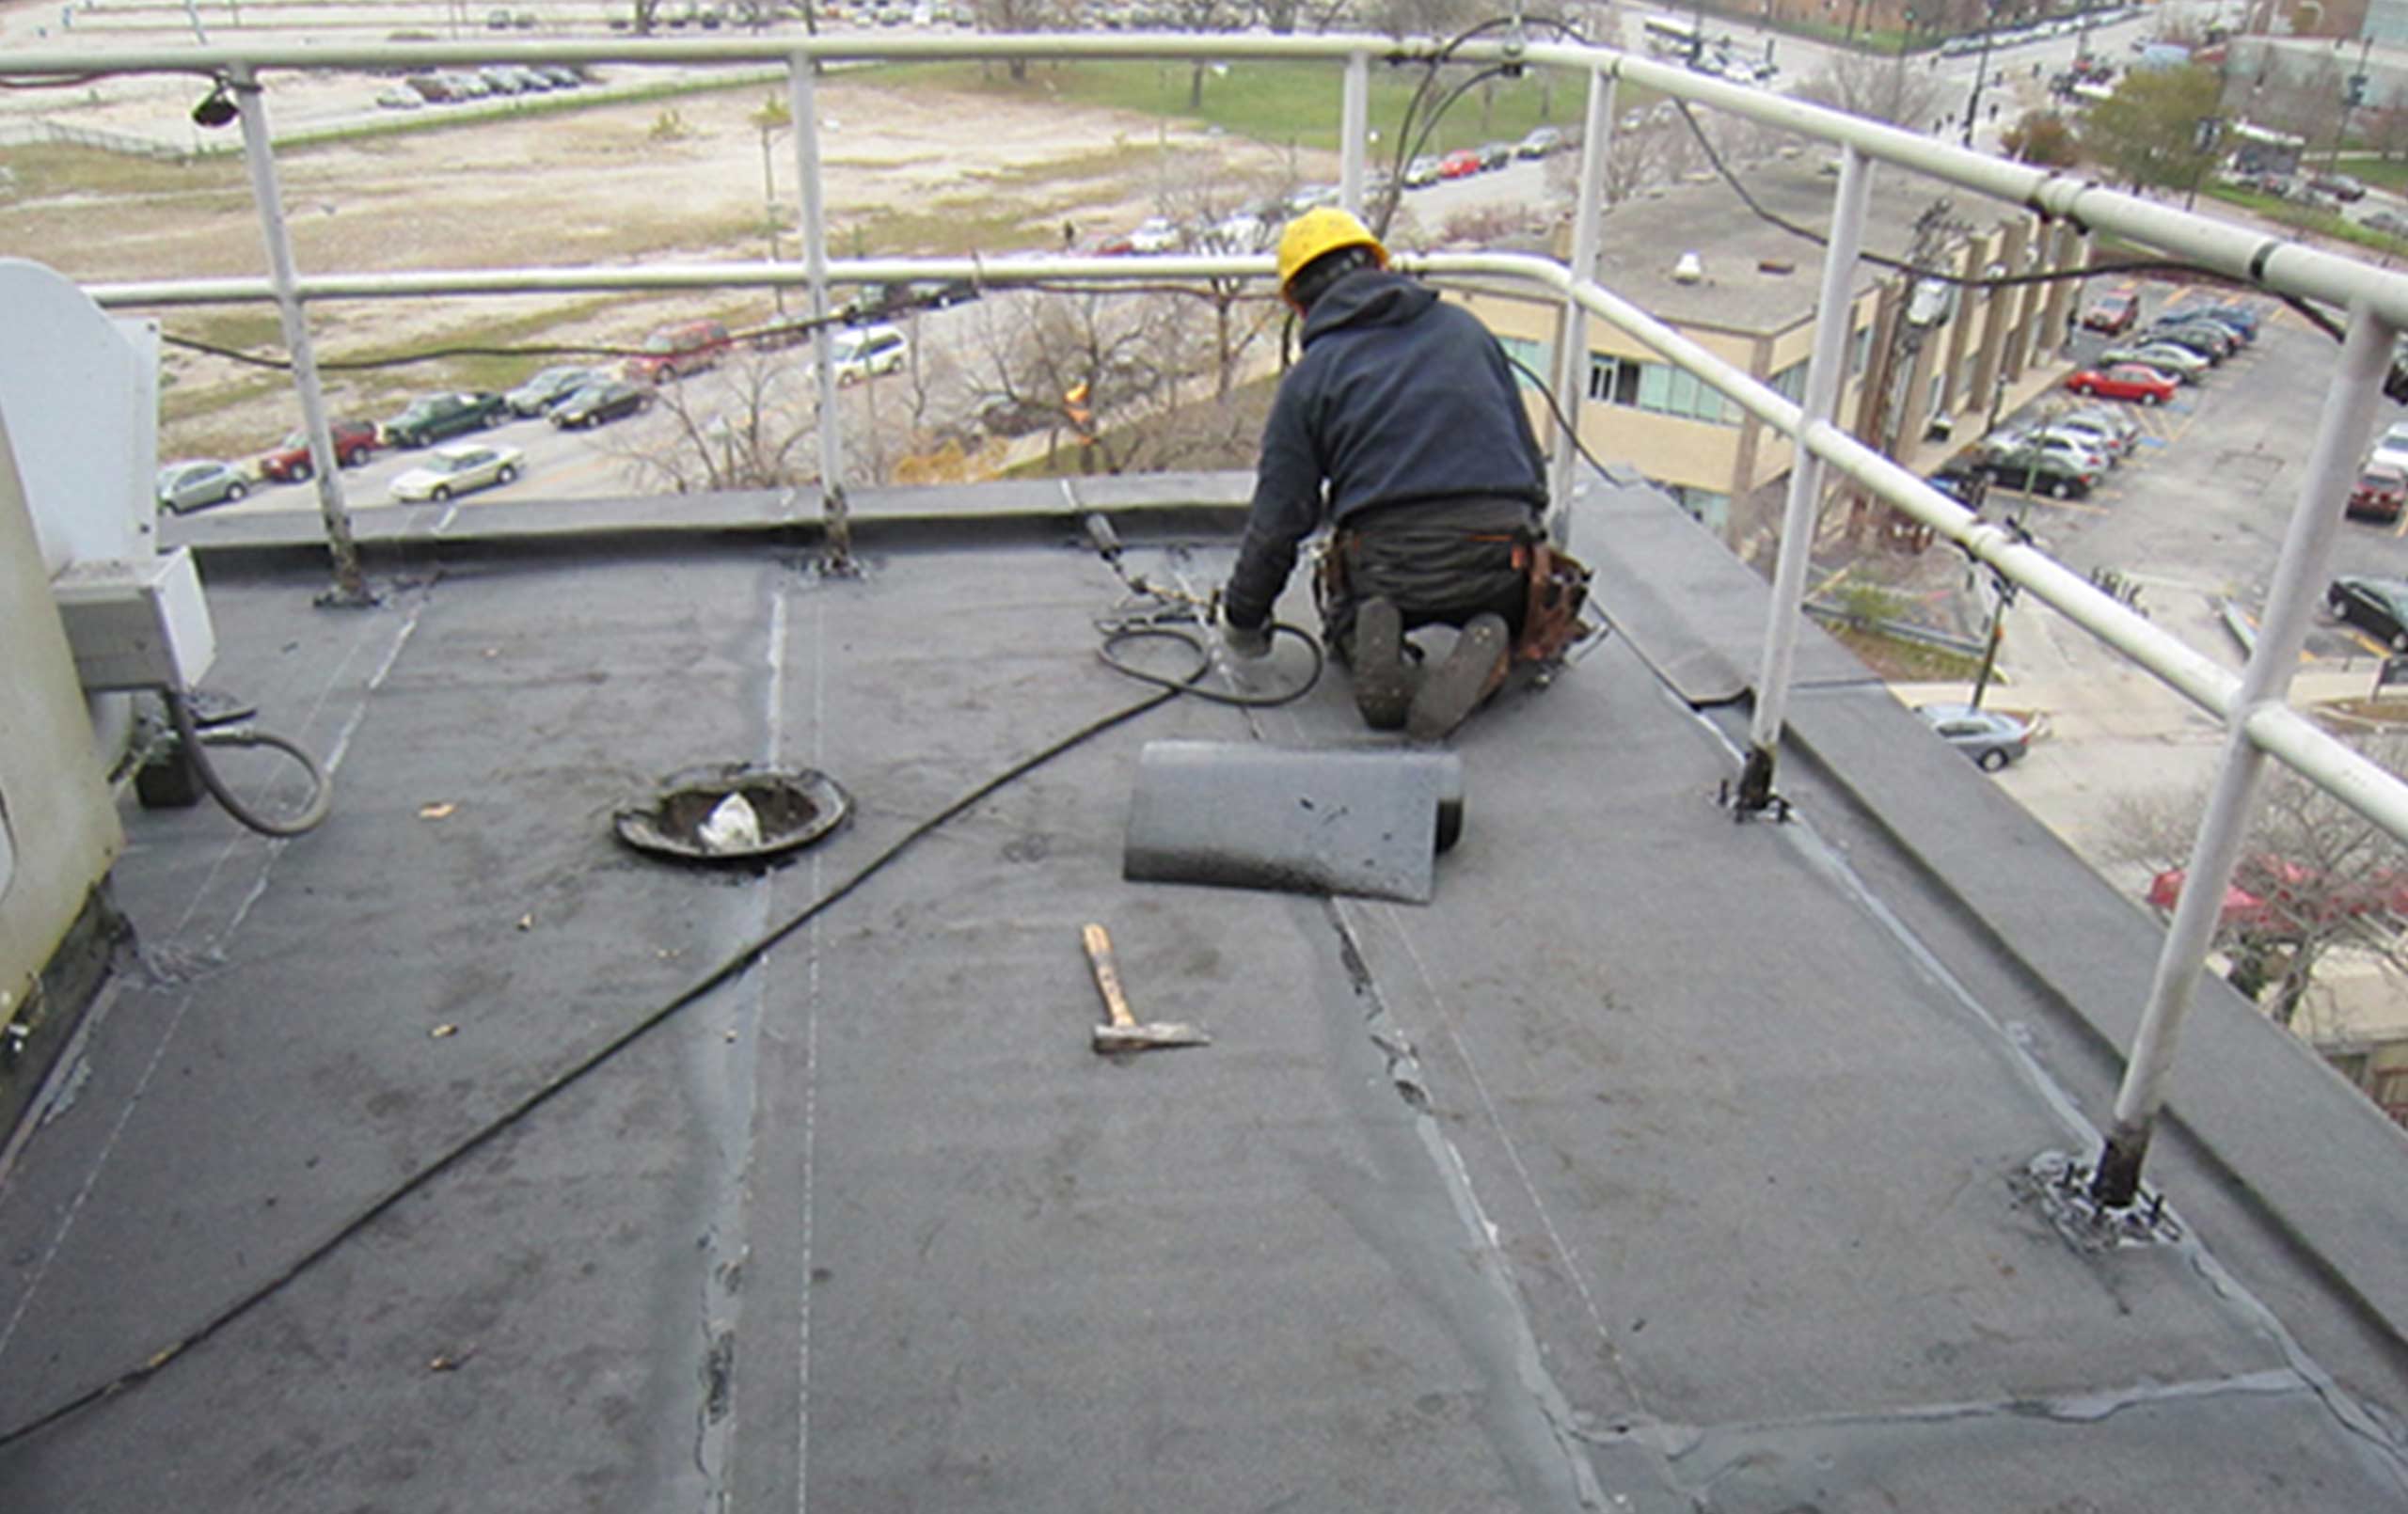 Facilities Directors, Plant Administrators, and OSHA Roof Safety